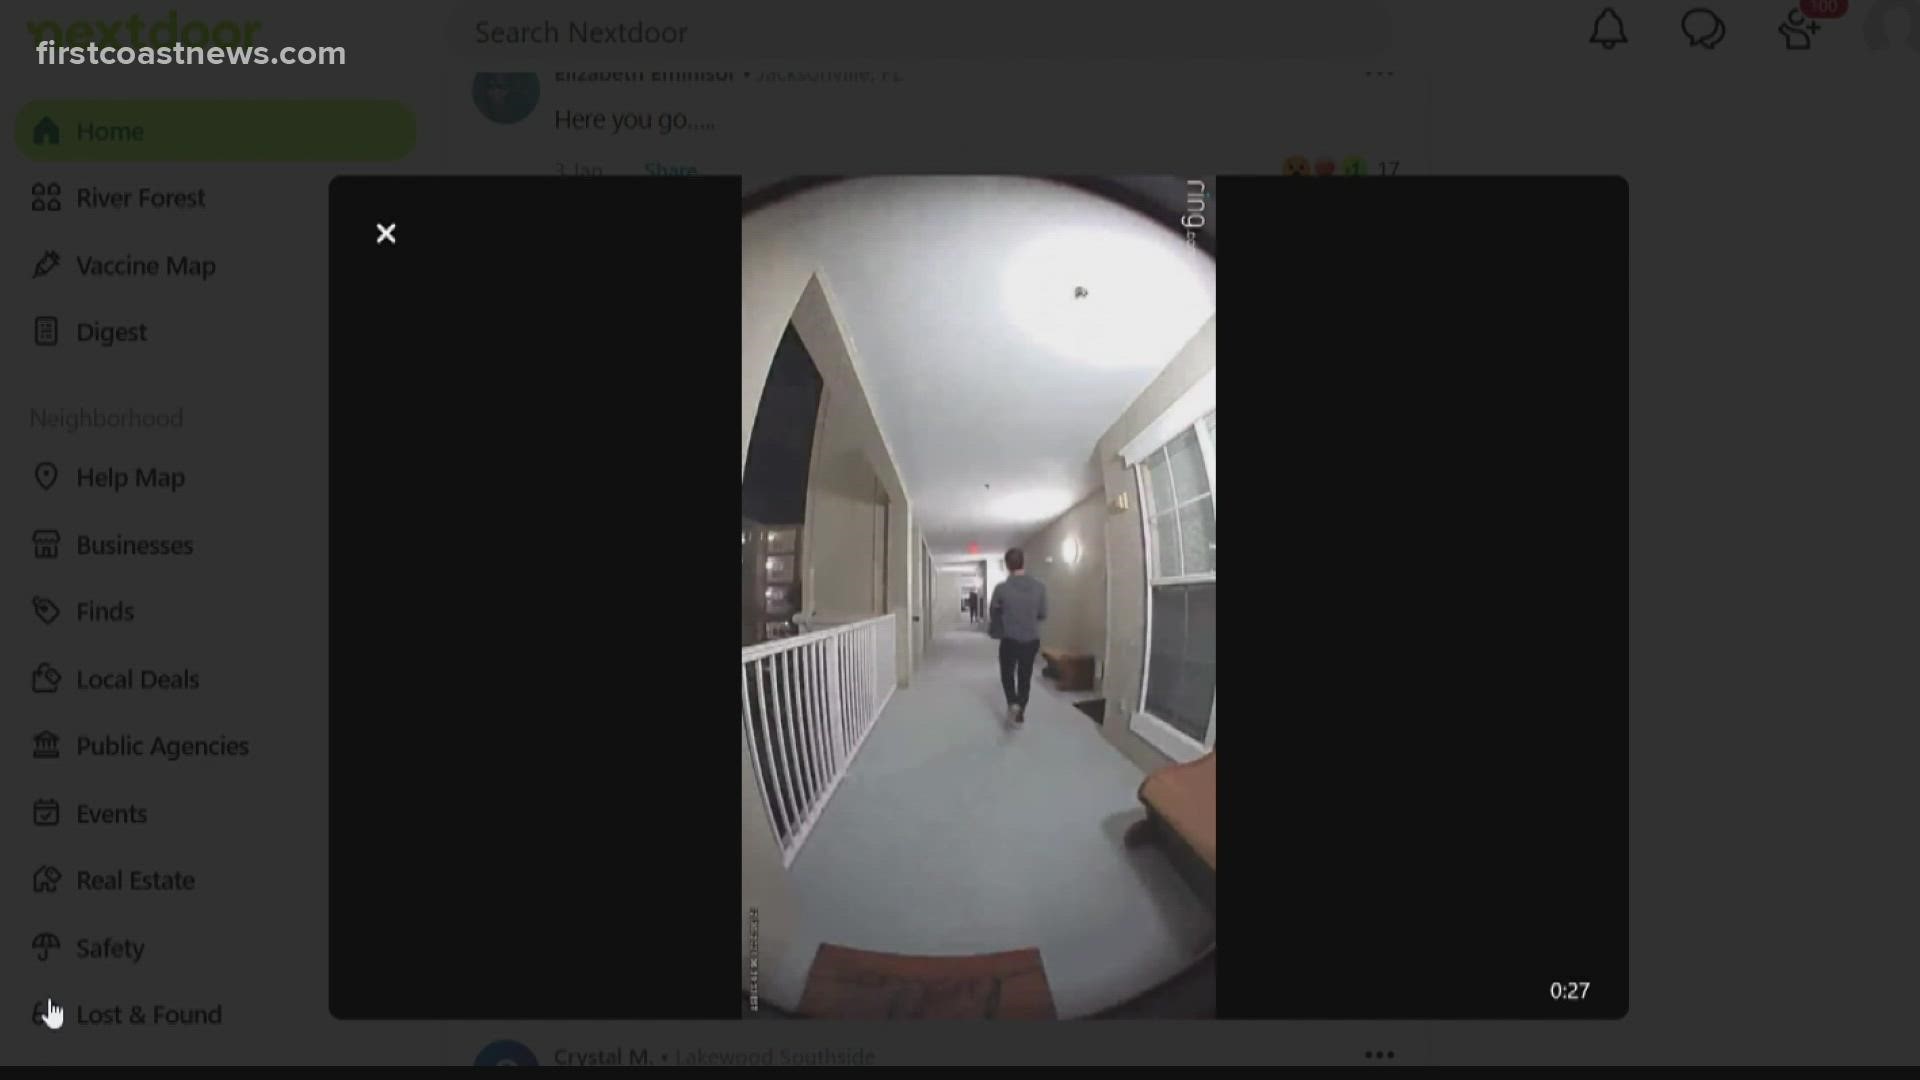 A ring Camera video shows two men walking up to the door and taking the package.